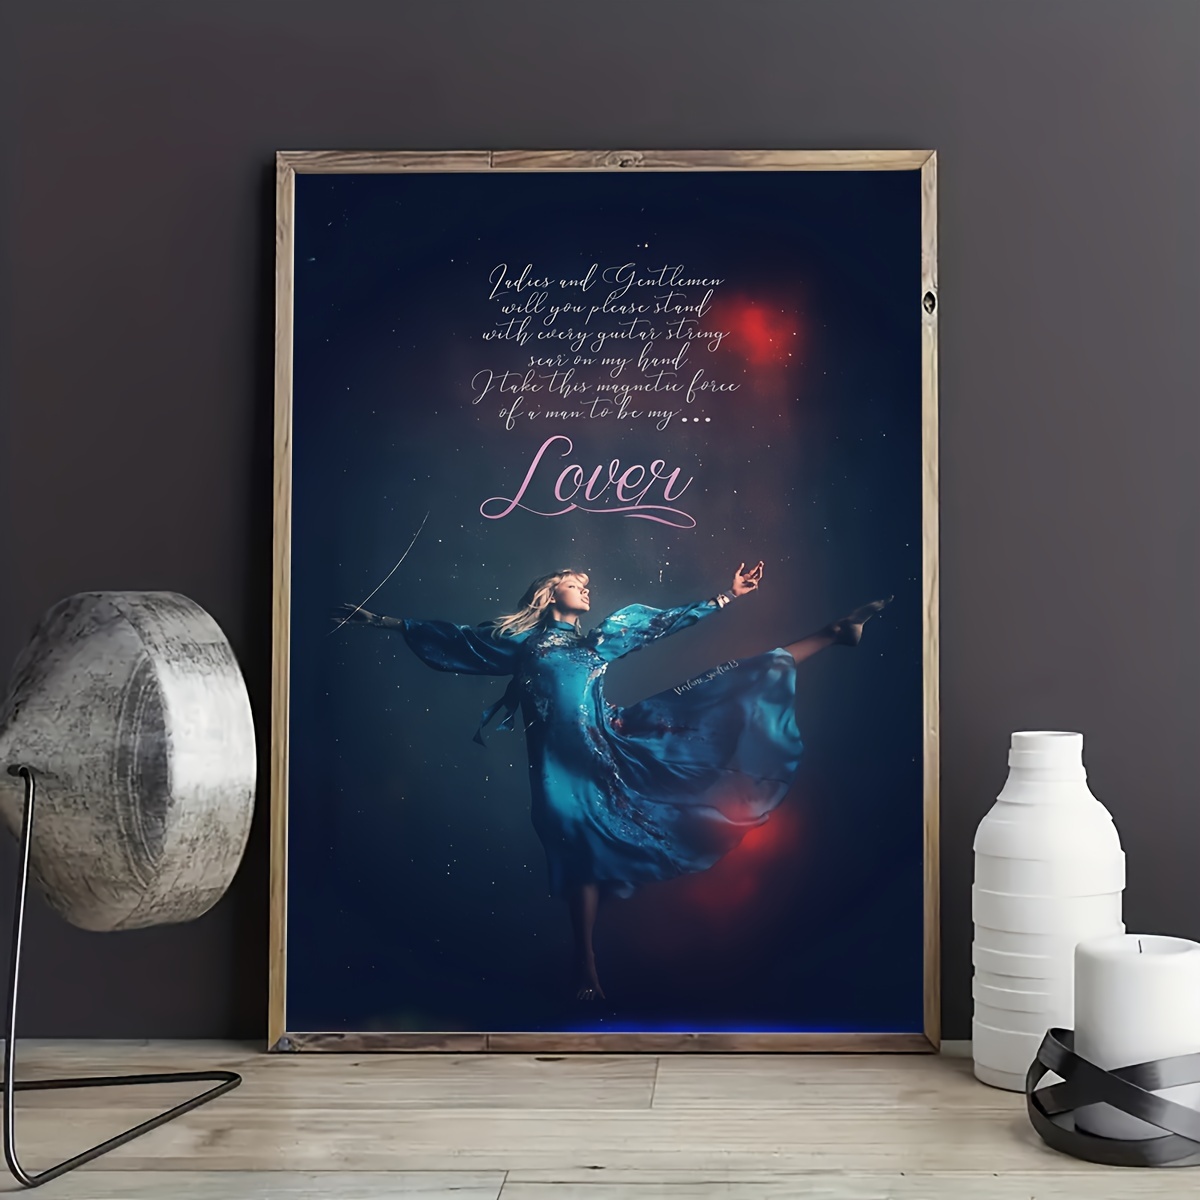 Taylor Swift Canvas Wall Art Print Poster For Home Decor ▻   ▻ Free Shipping ▻ Up to 70% OFF